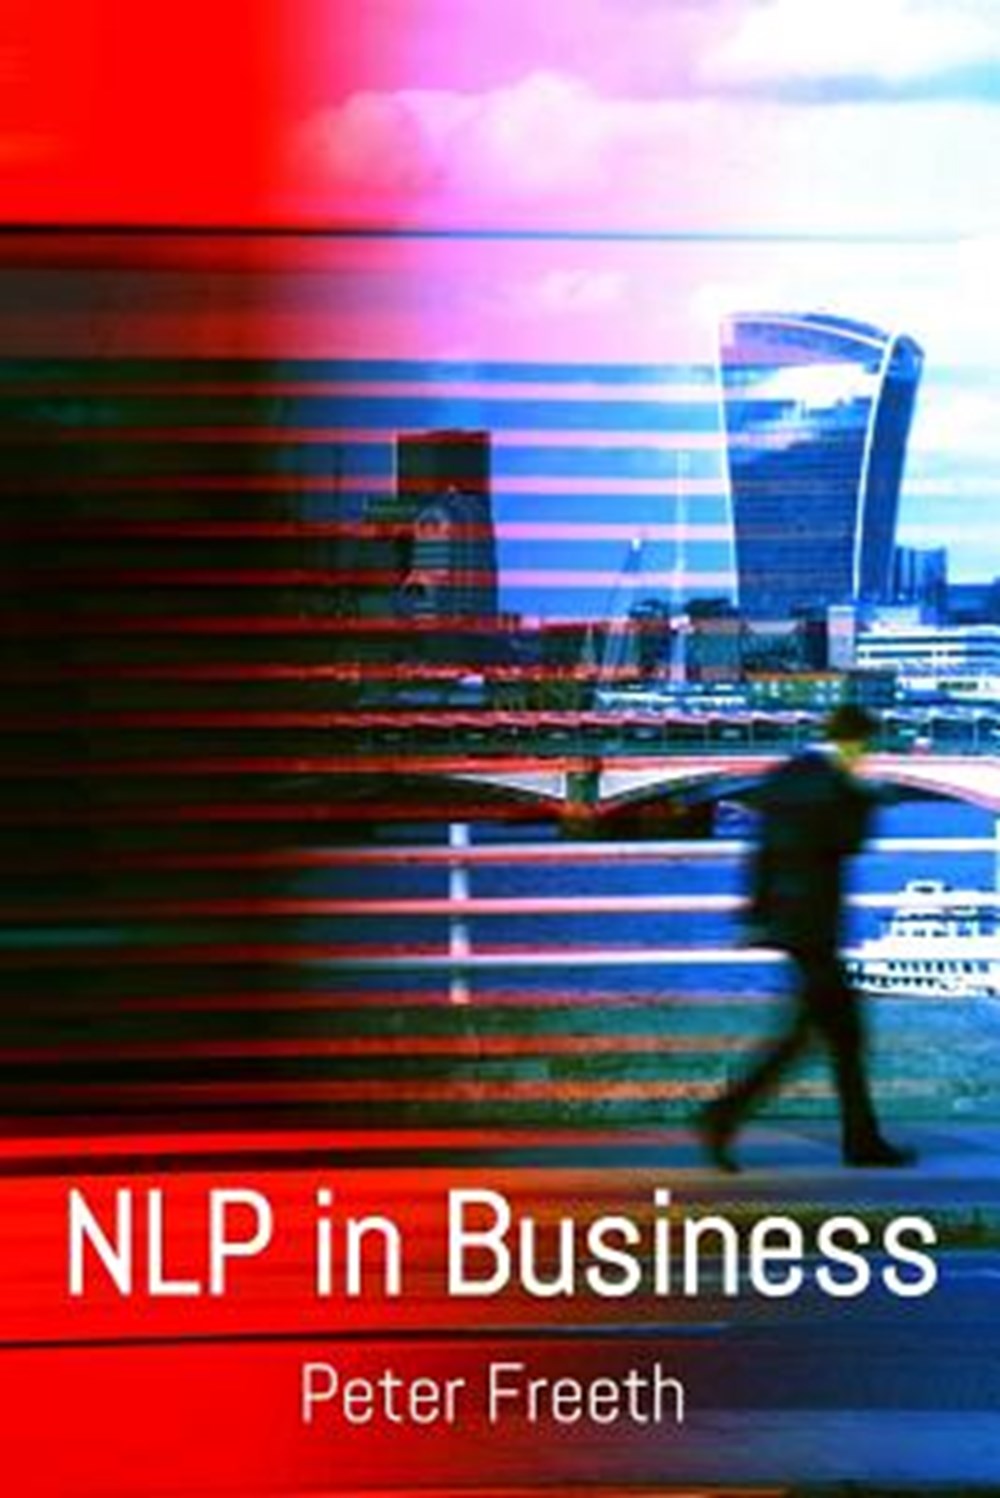 NLP in Business A practical companion guide for applying NLP easily, powerfully and elegantly in you